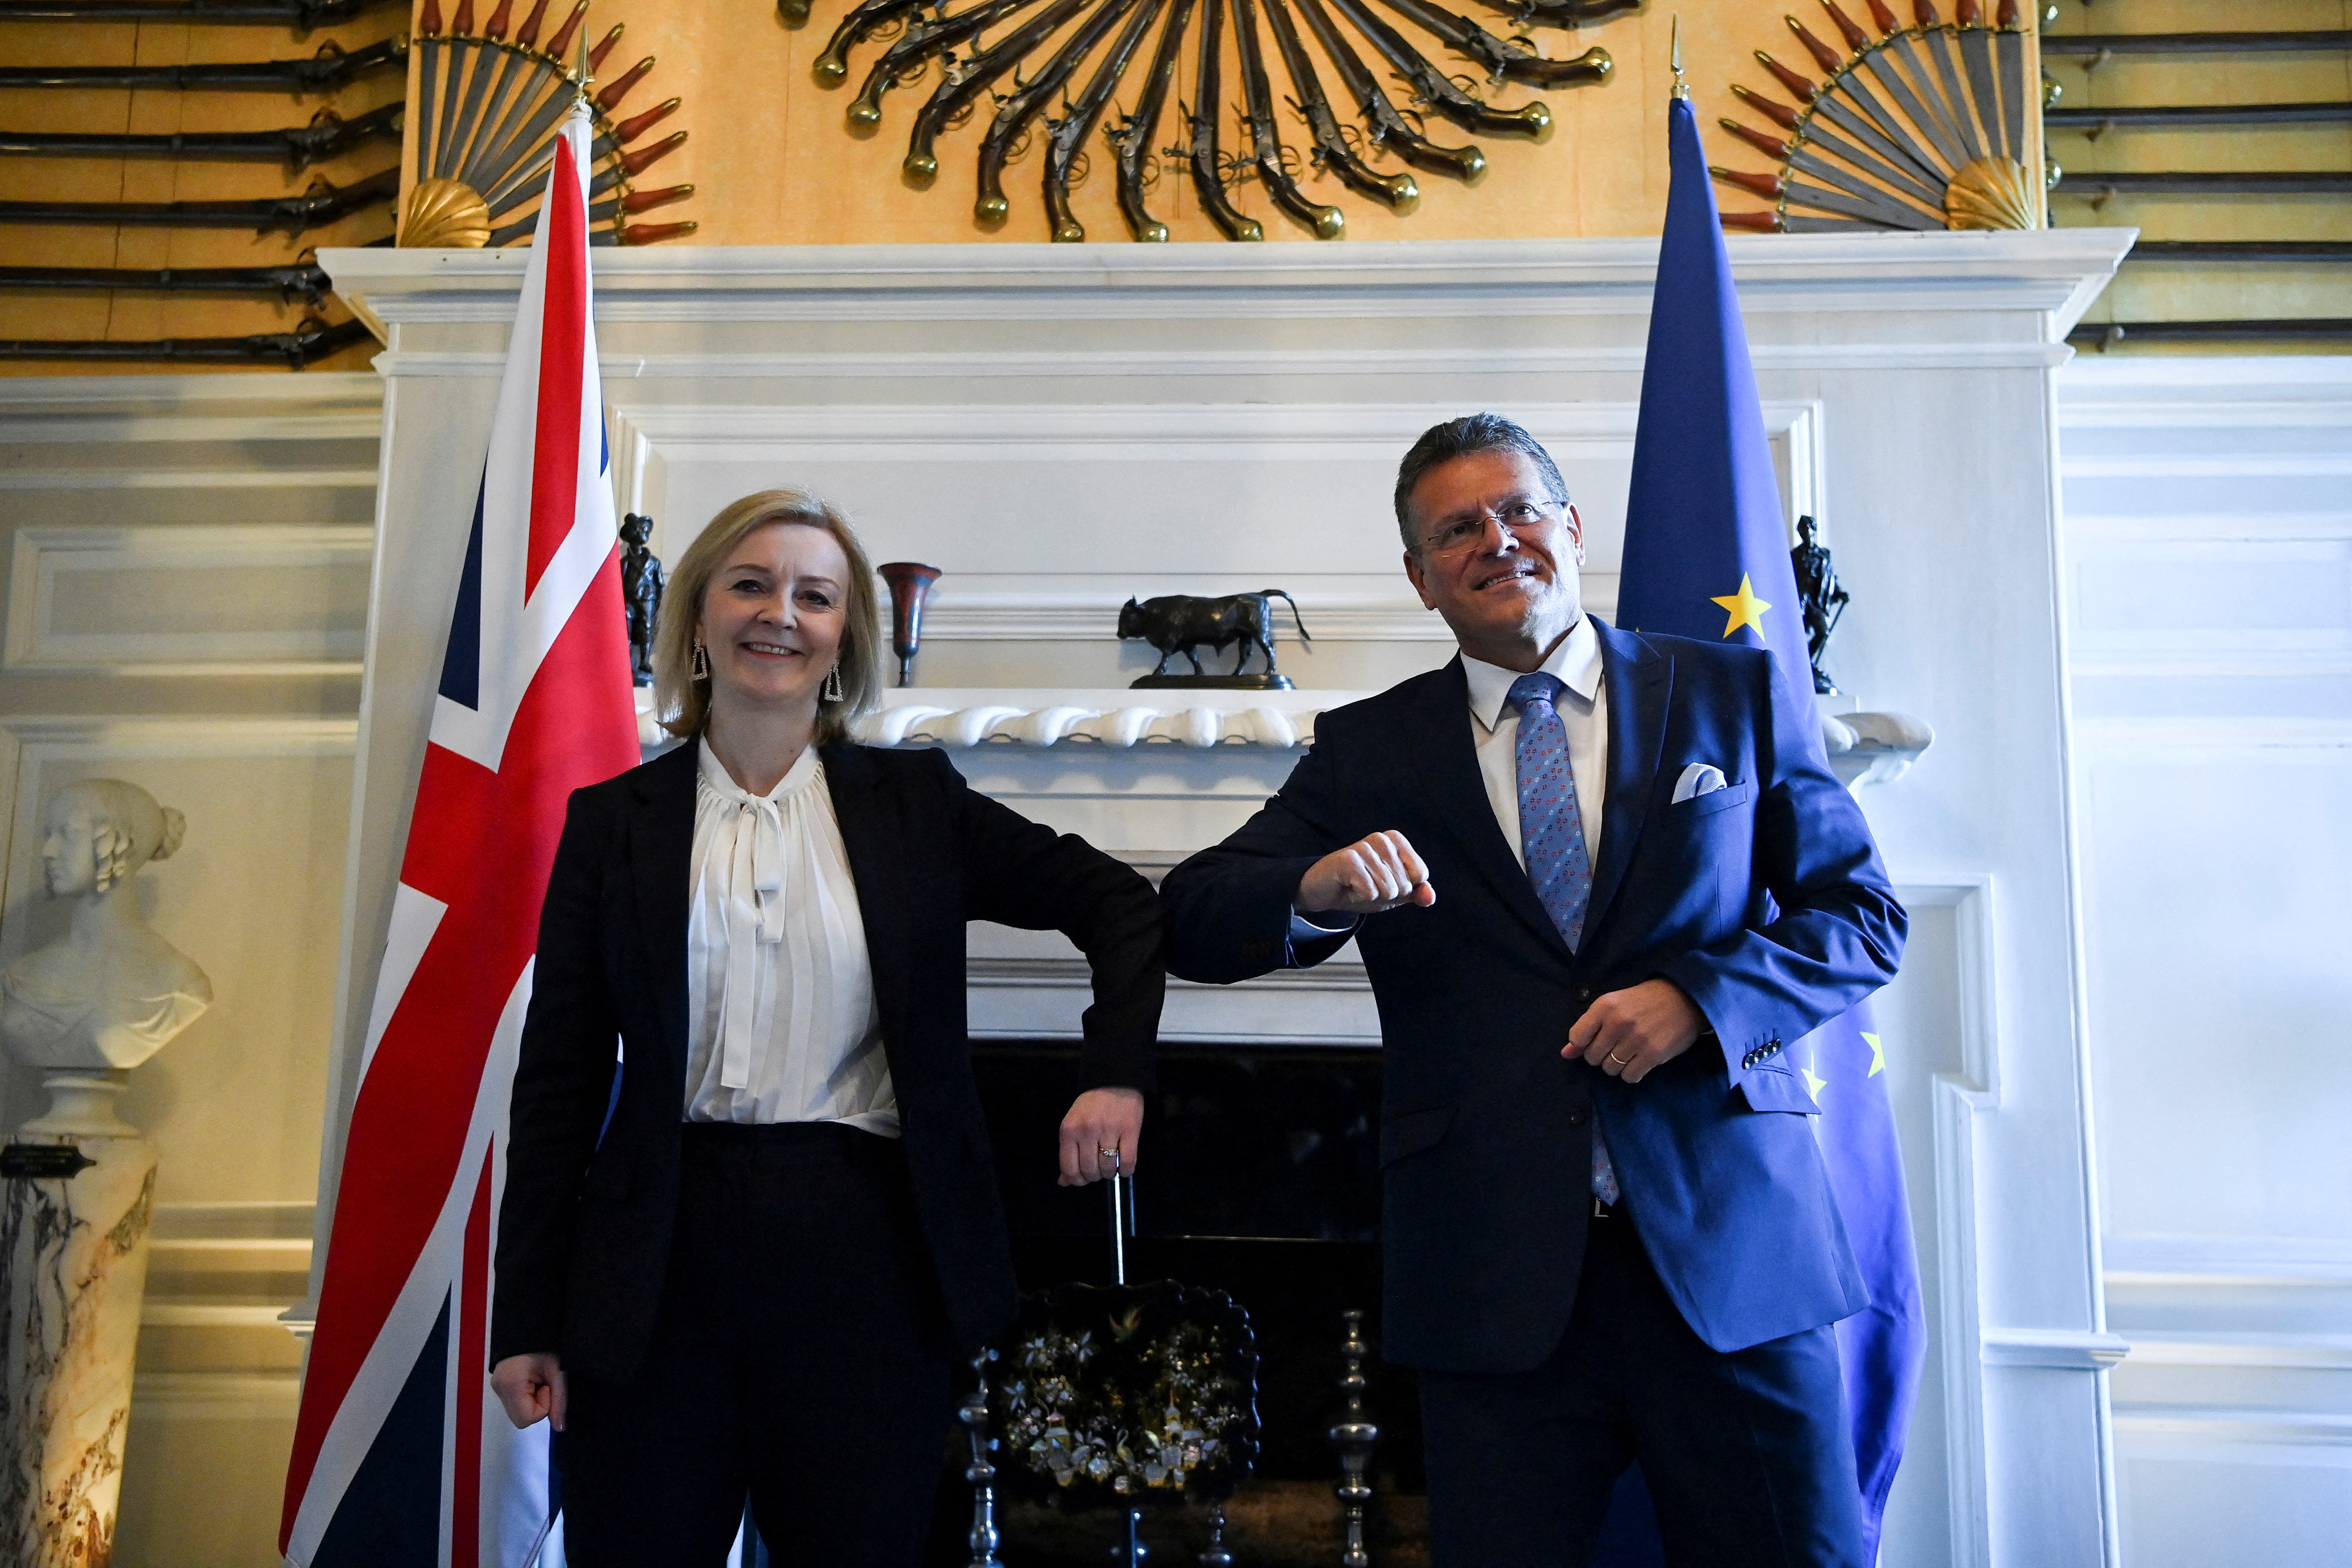 British Foreign Secretary Liz Truss bumps elbows with European Commission Vice-President Maros Sefcovic during a meeting at Chevening House in Sevenoaks, south of London, Britain January 13, 2022. Ben Stansall/Pool via REUTERS